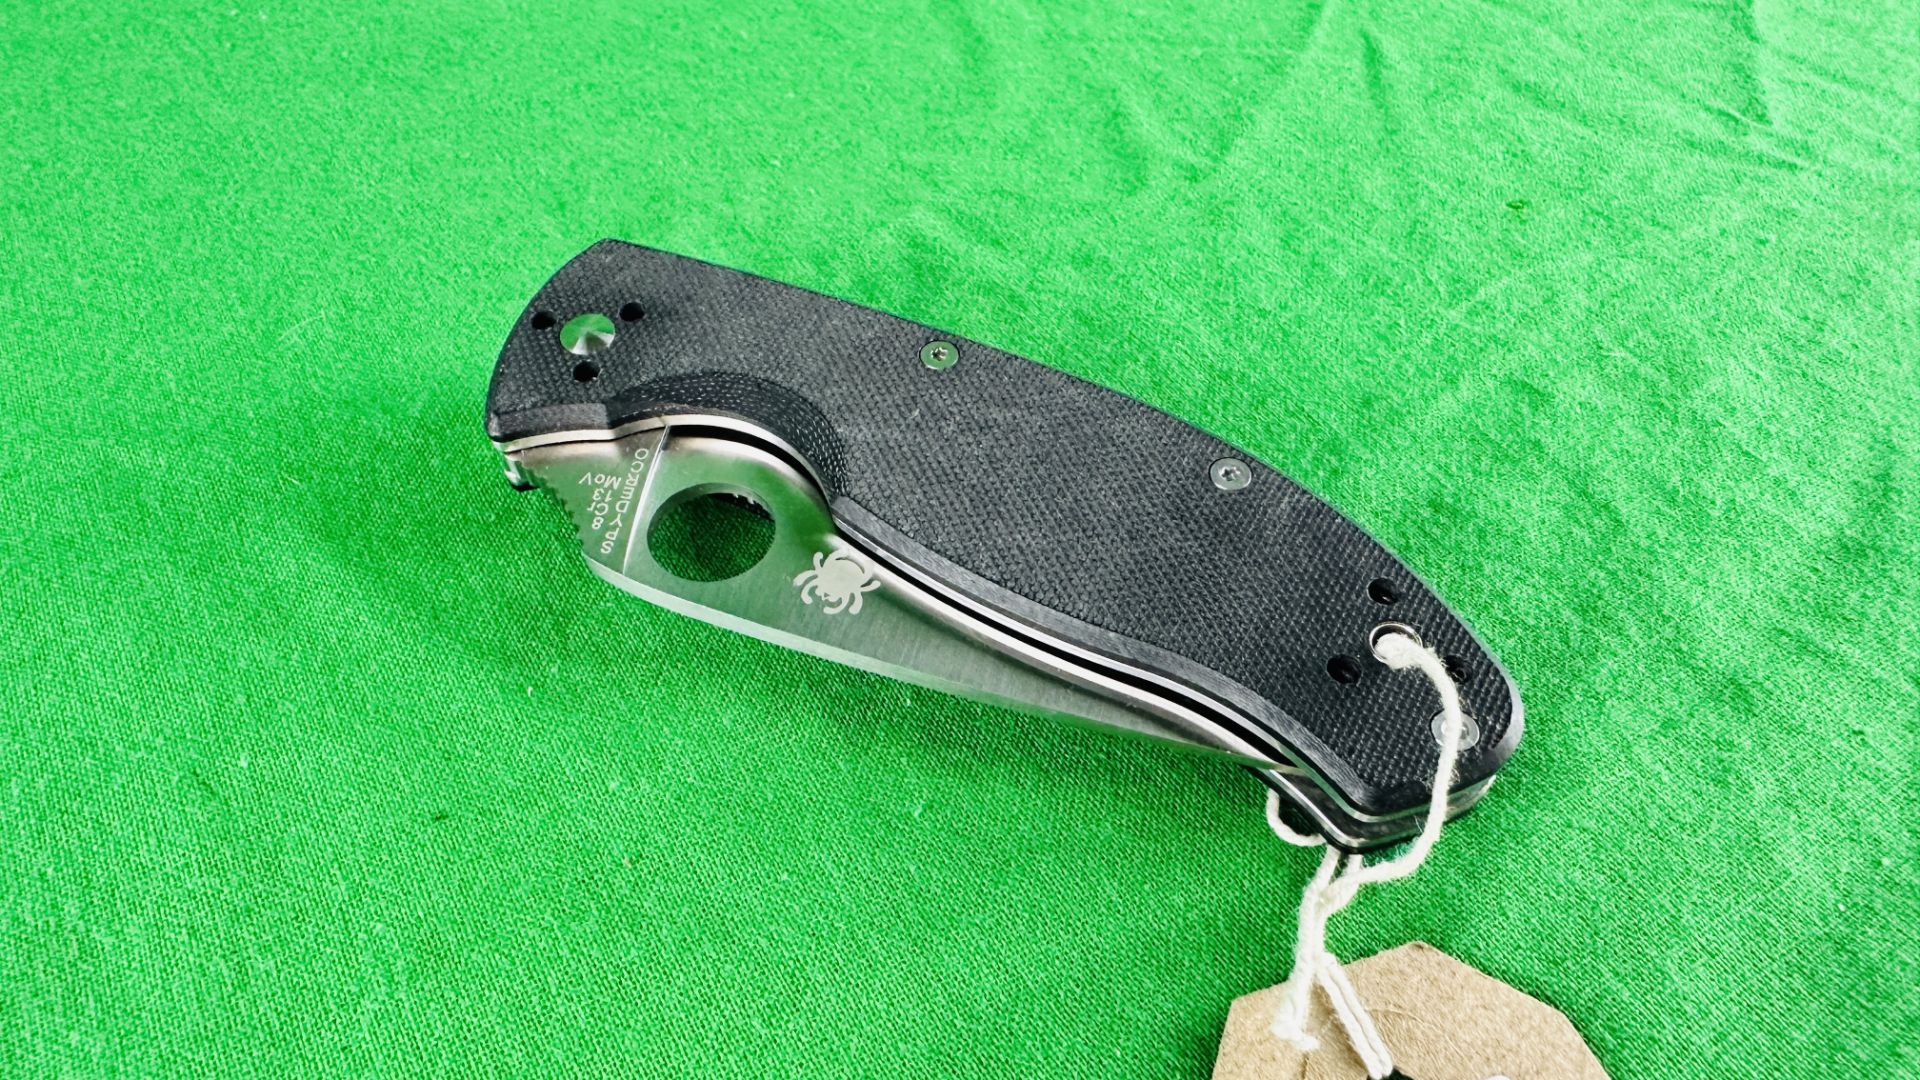 SPYDERCO TENACIOUS C122GP FOLDING POCKET LOCK KNIFE - NO POSTAGE OR PACKING AVAILABLE - Image 6 of 6